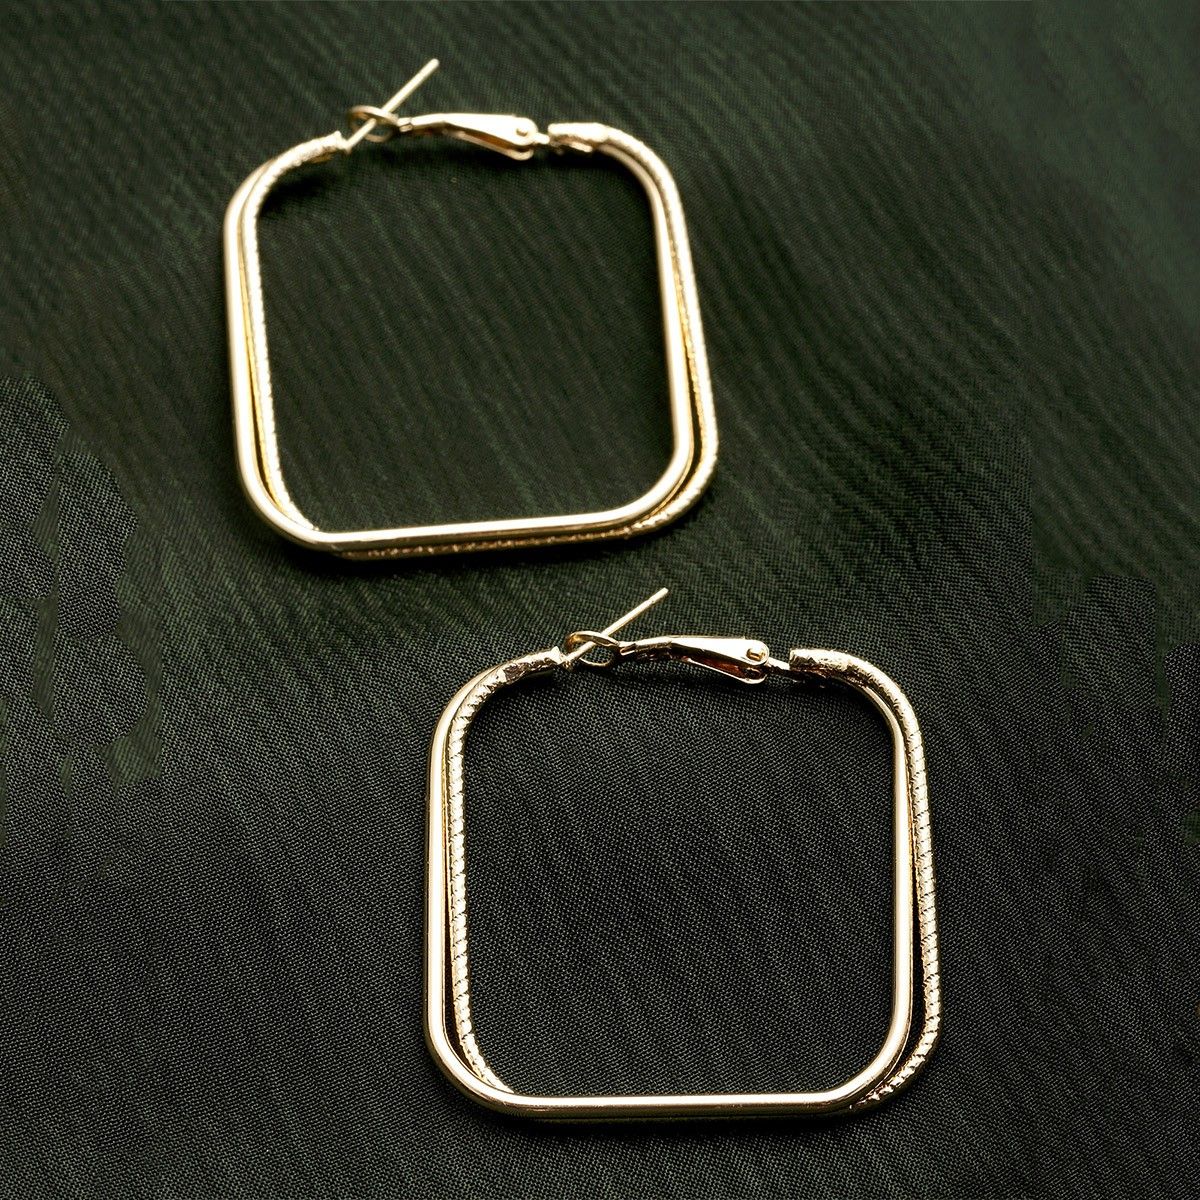 18ct Gold Plated Or Silver Mini Square Hoop Earrings By Hurleyburley   notonthehighstreetcom